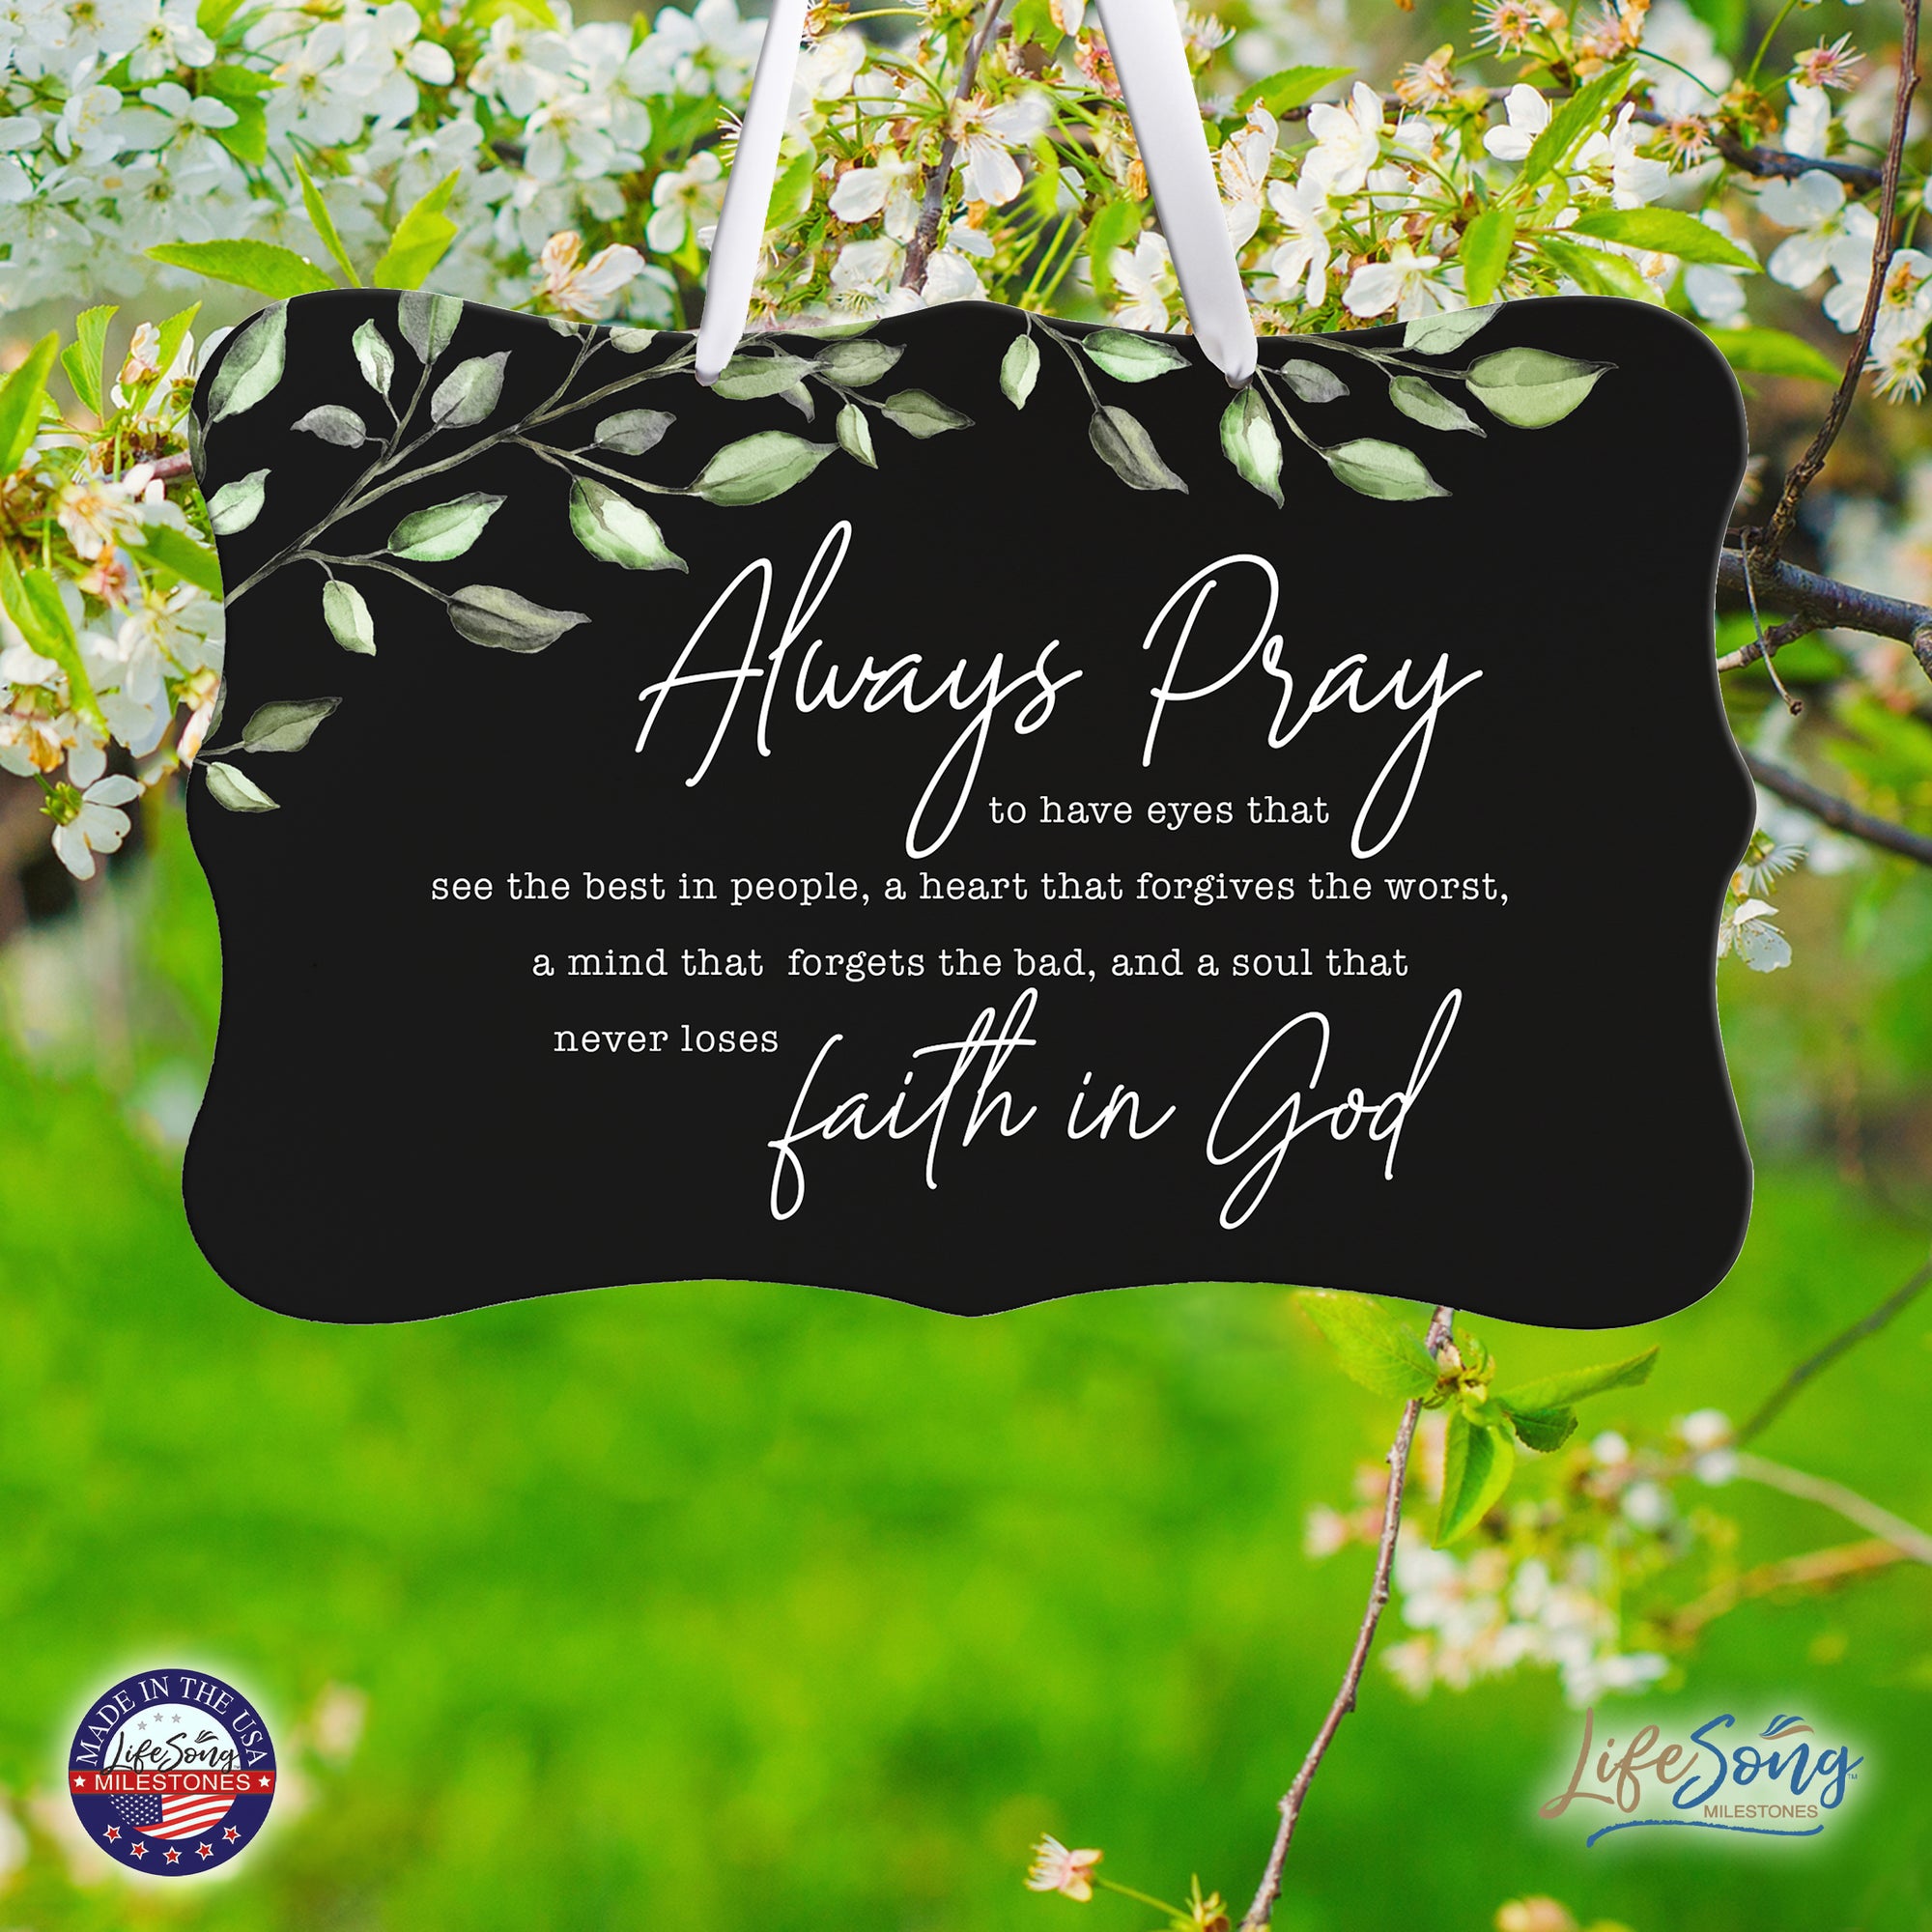 Wooden Wall Hanging Sign for Home Decorations 8x12 - Always Pray (Leaves)